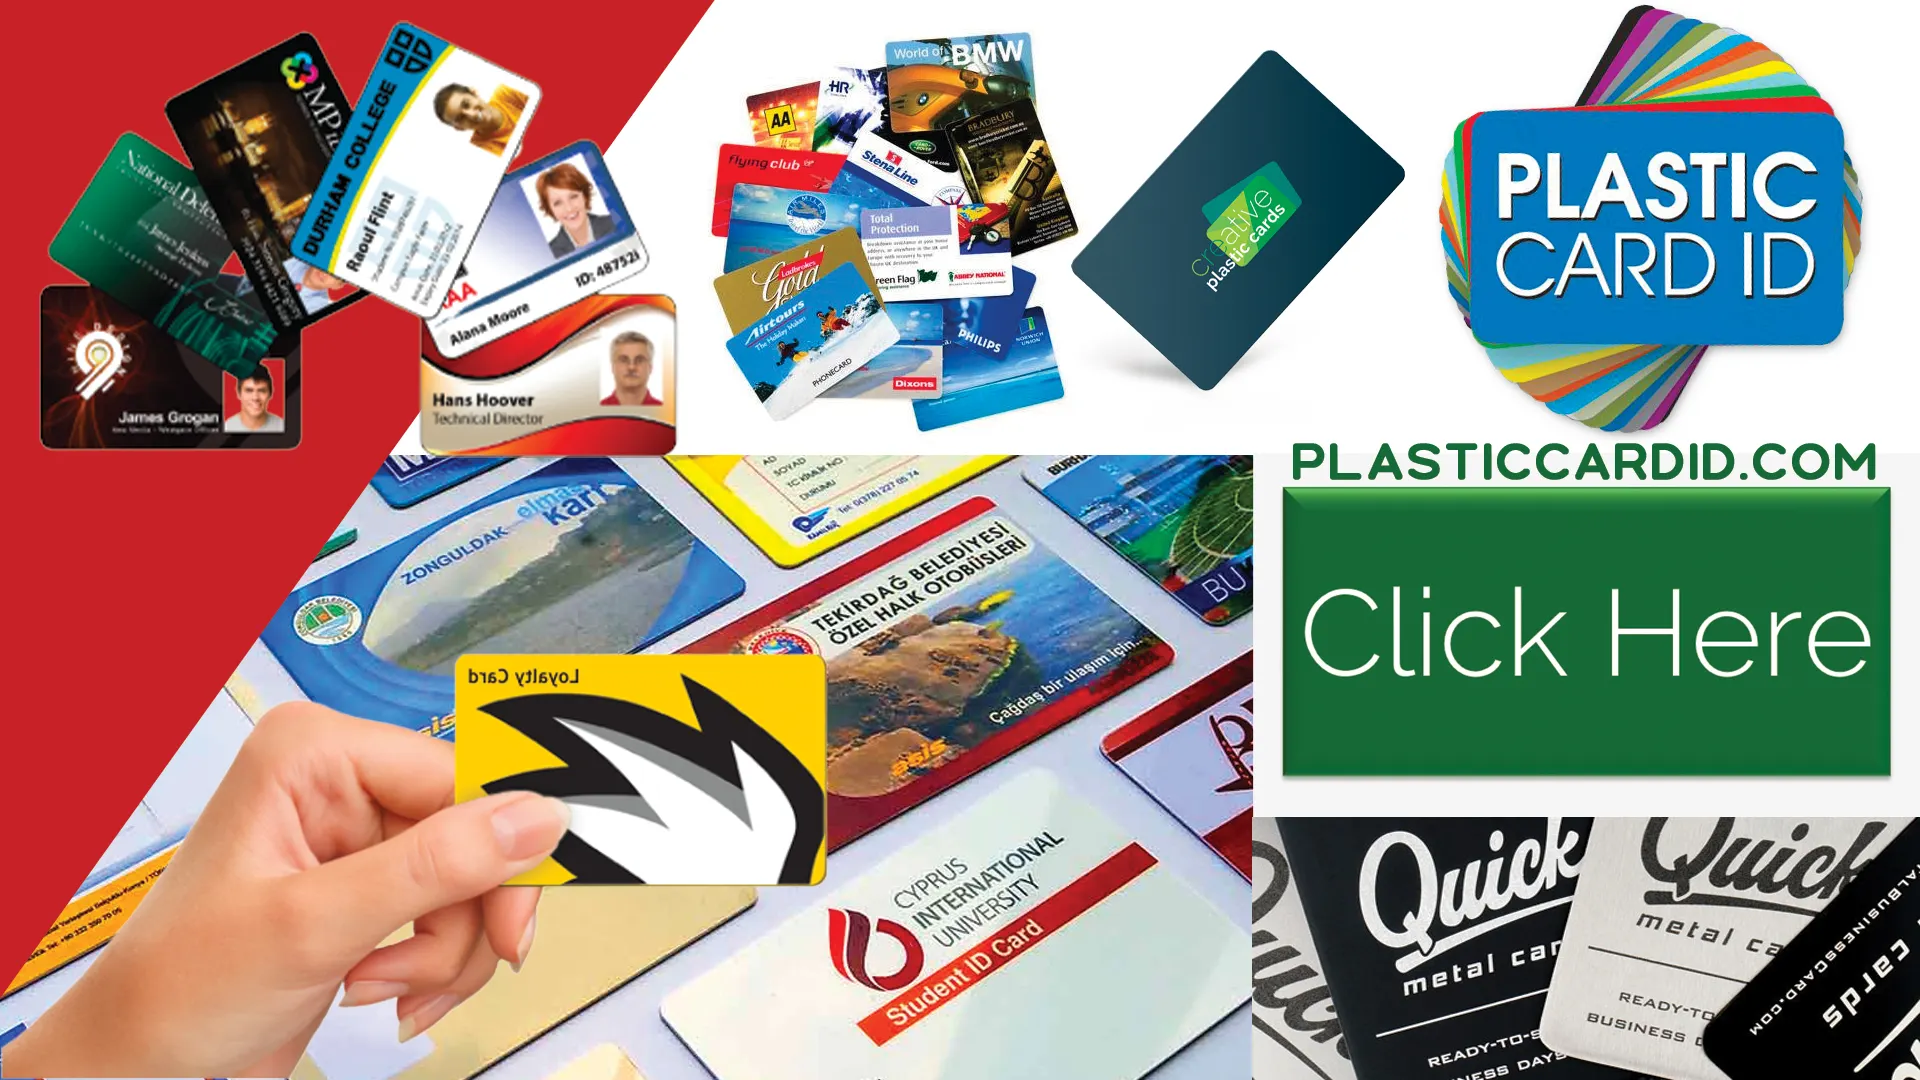 The Business of Cards: Plastic Cards in the Professional Sphere